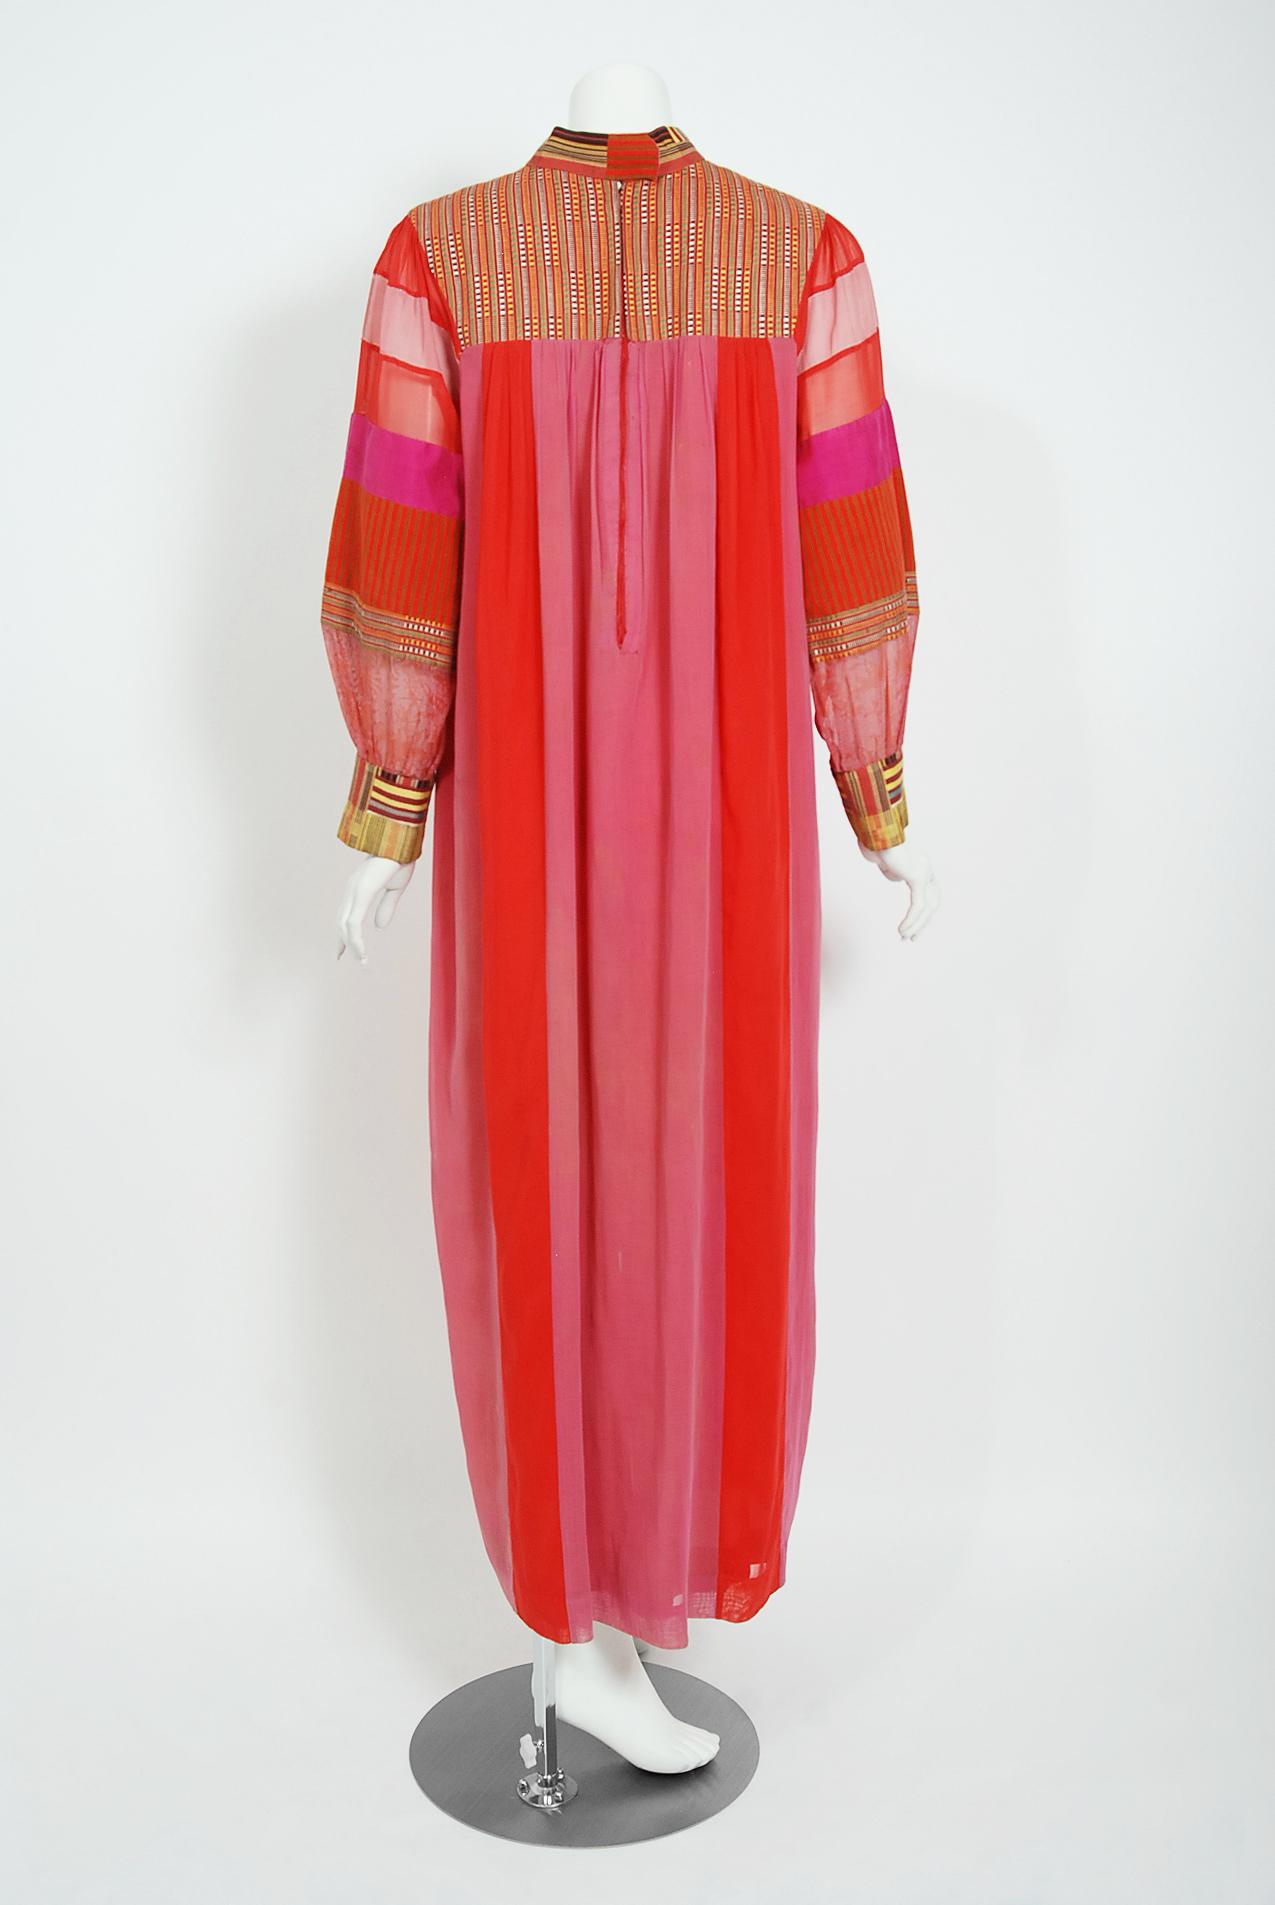 Women's Vintage 1970's Embroidered Patchwork Cotton Maxi Dress Worn By Zsa Zsa Gabor For Sale